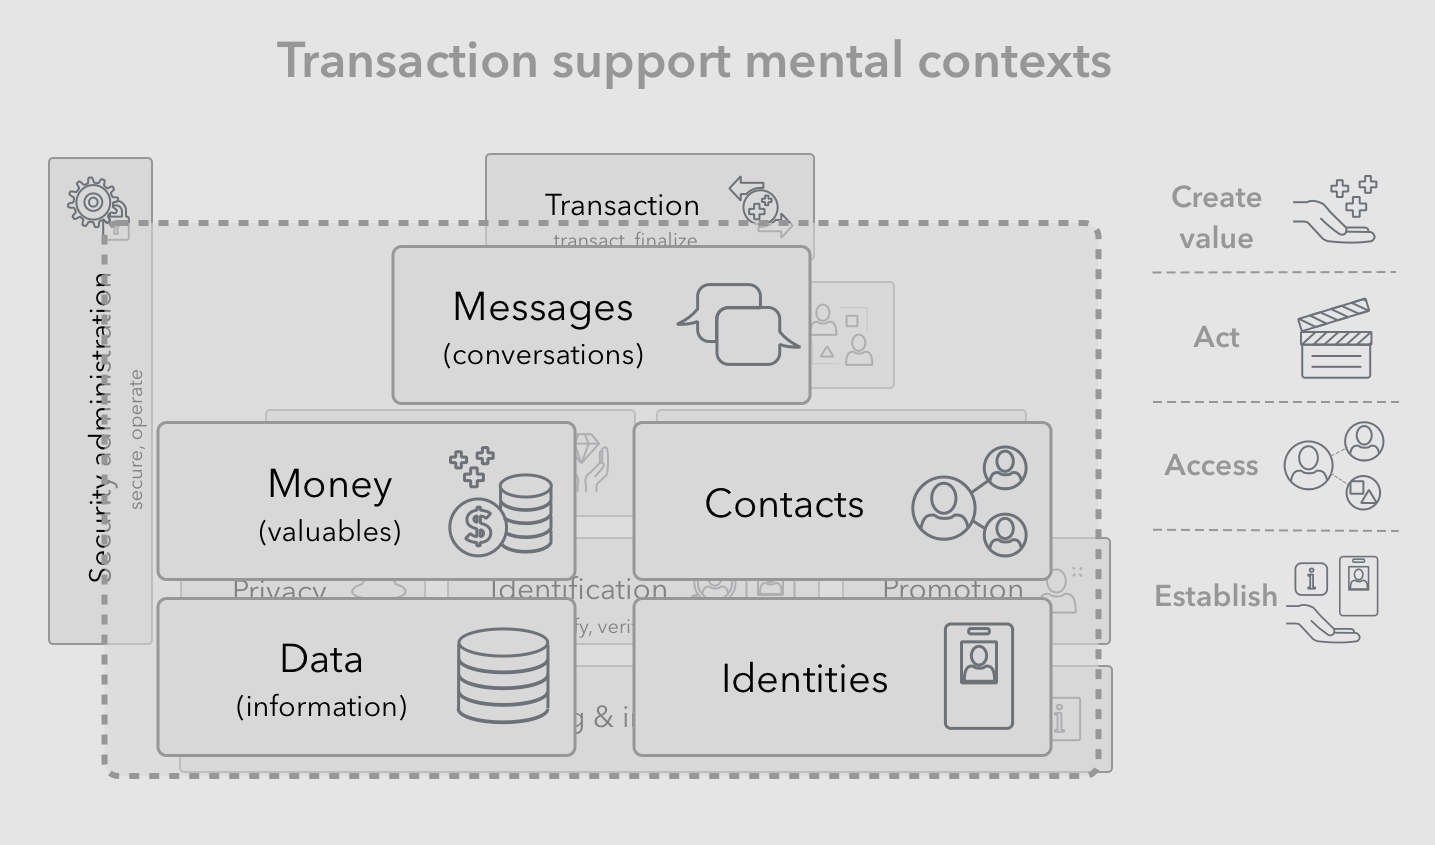 Transaction support activities and mental contexts